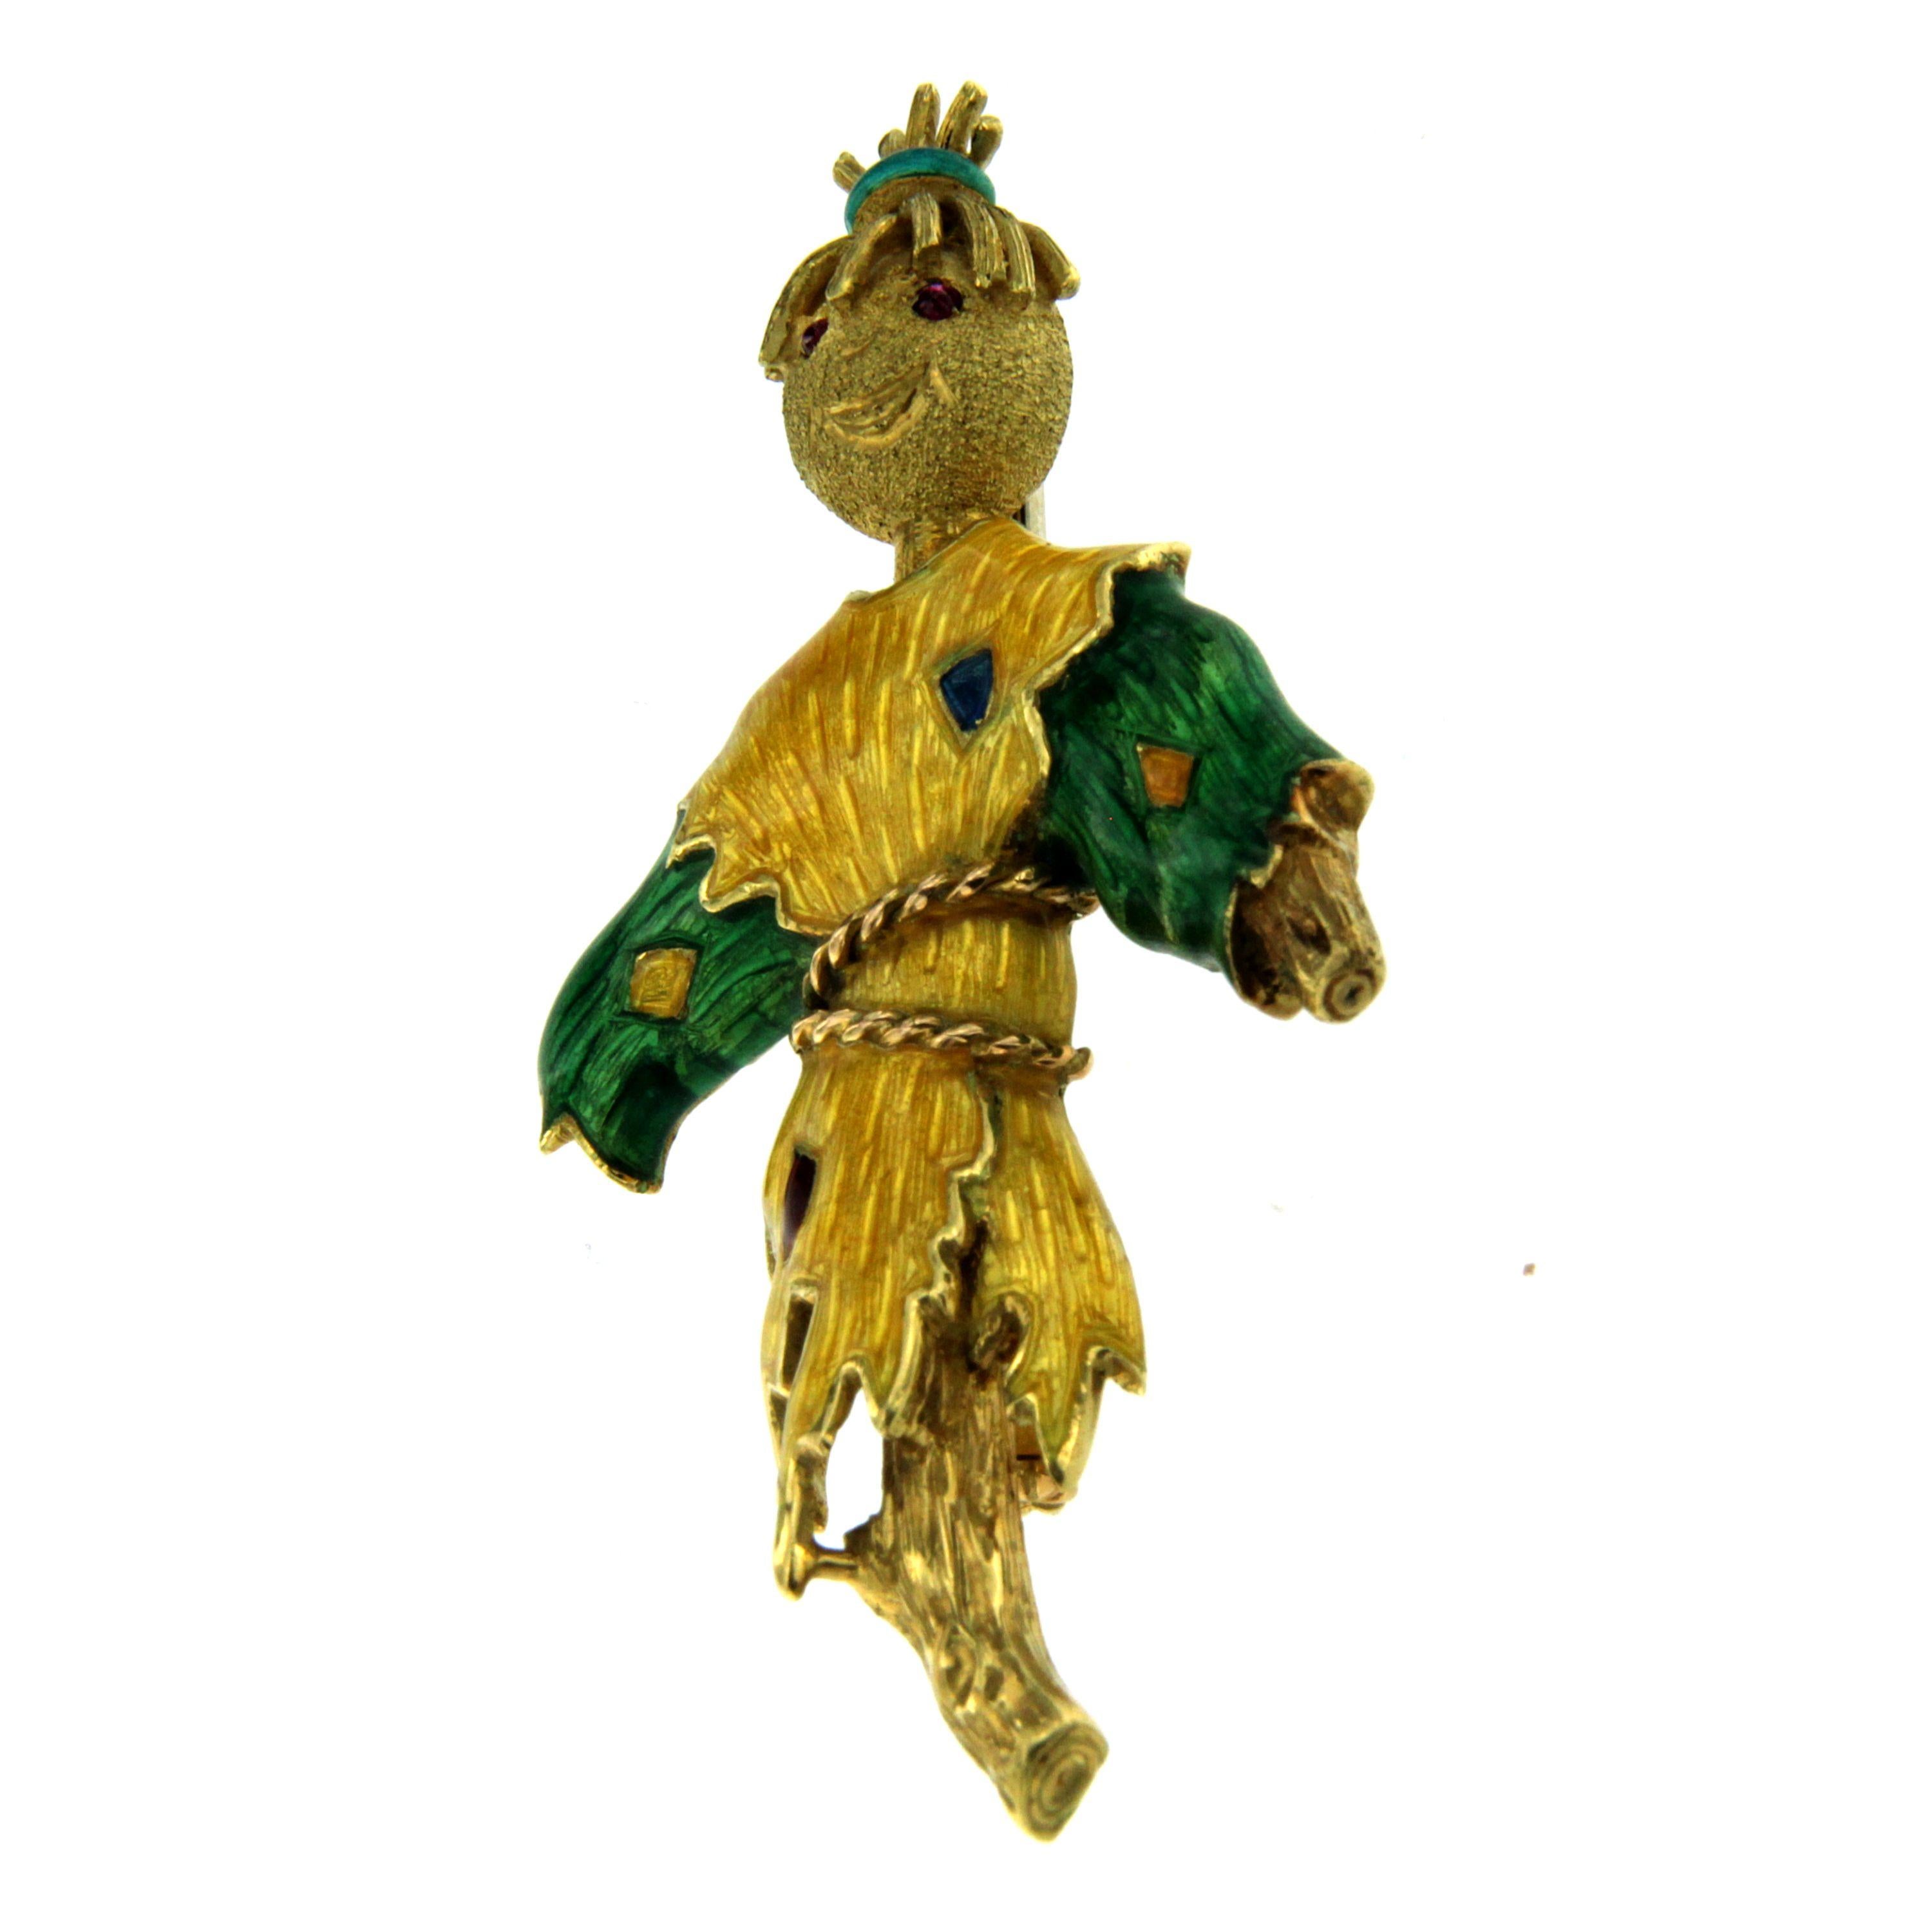 Scarecrow brooch in costume enameled on 18K yellow gold and adorned by ruby and sapphire.
The brooch is stamped with creator marker's mark and a hallmark for 18 karat gold.

This unusual piece is designed and crafted entirely by hand in the